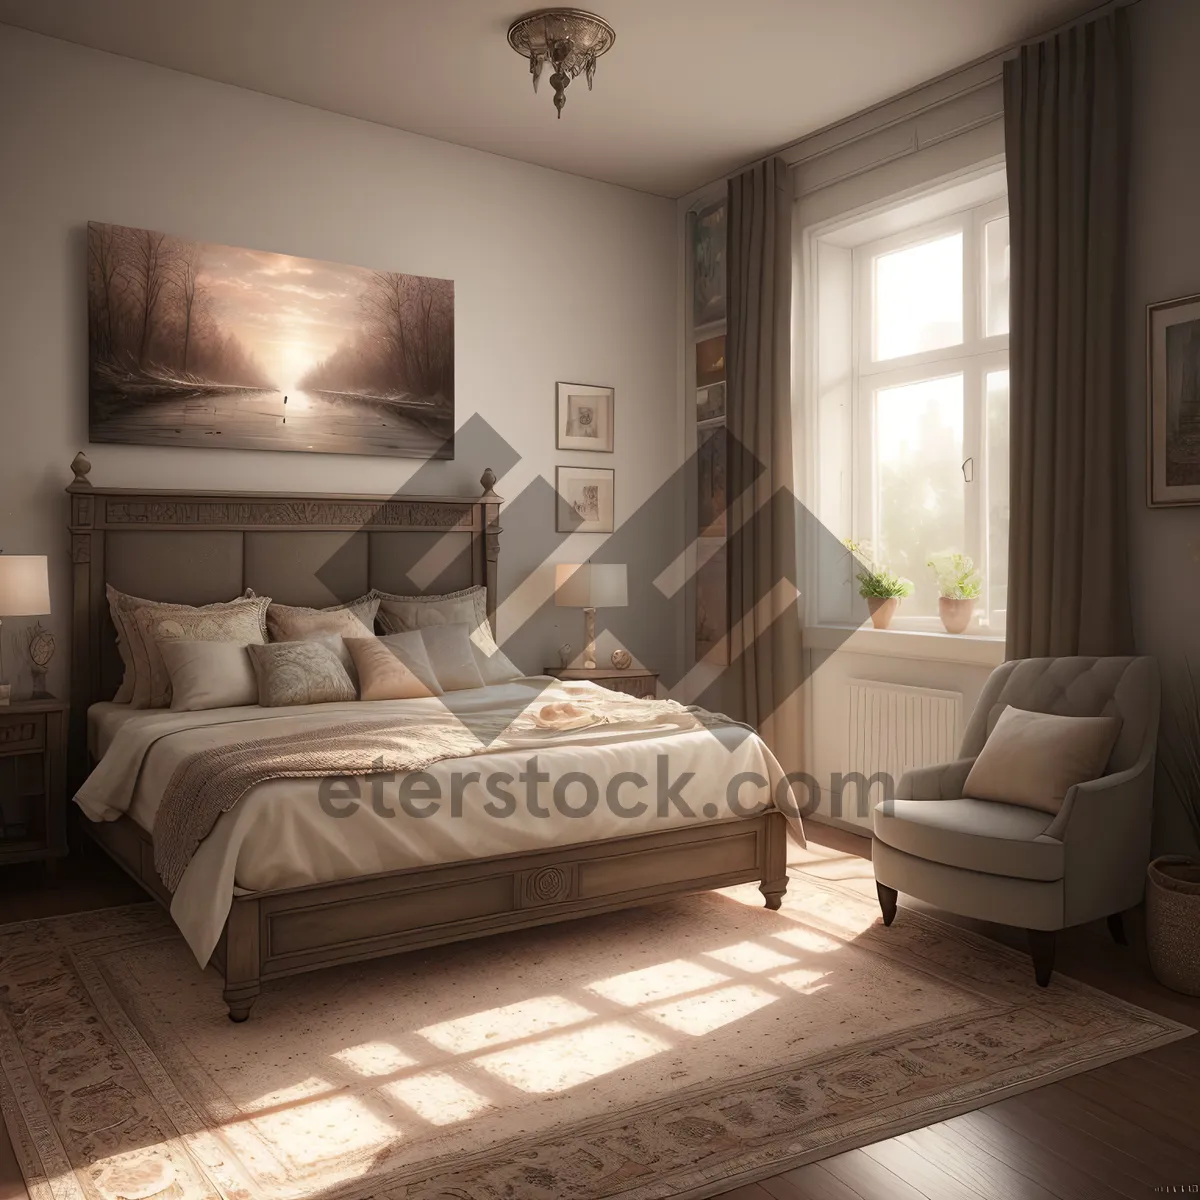 Picture of Modern Bedroom with Cozy Furniture and Stylish Decor